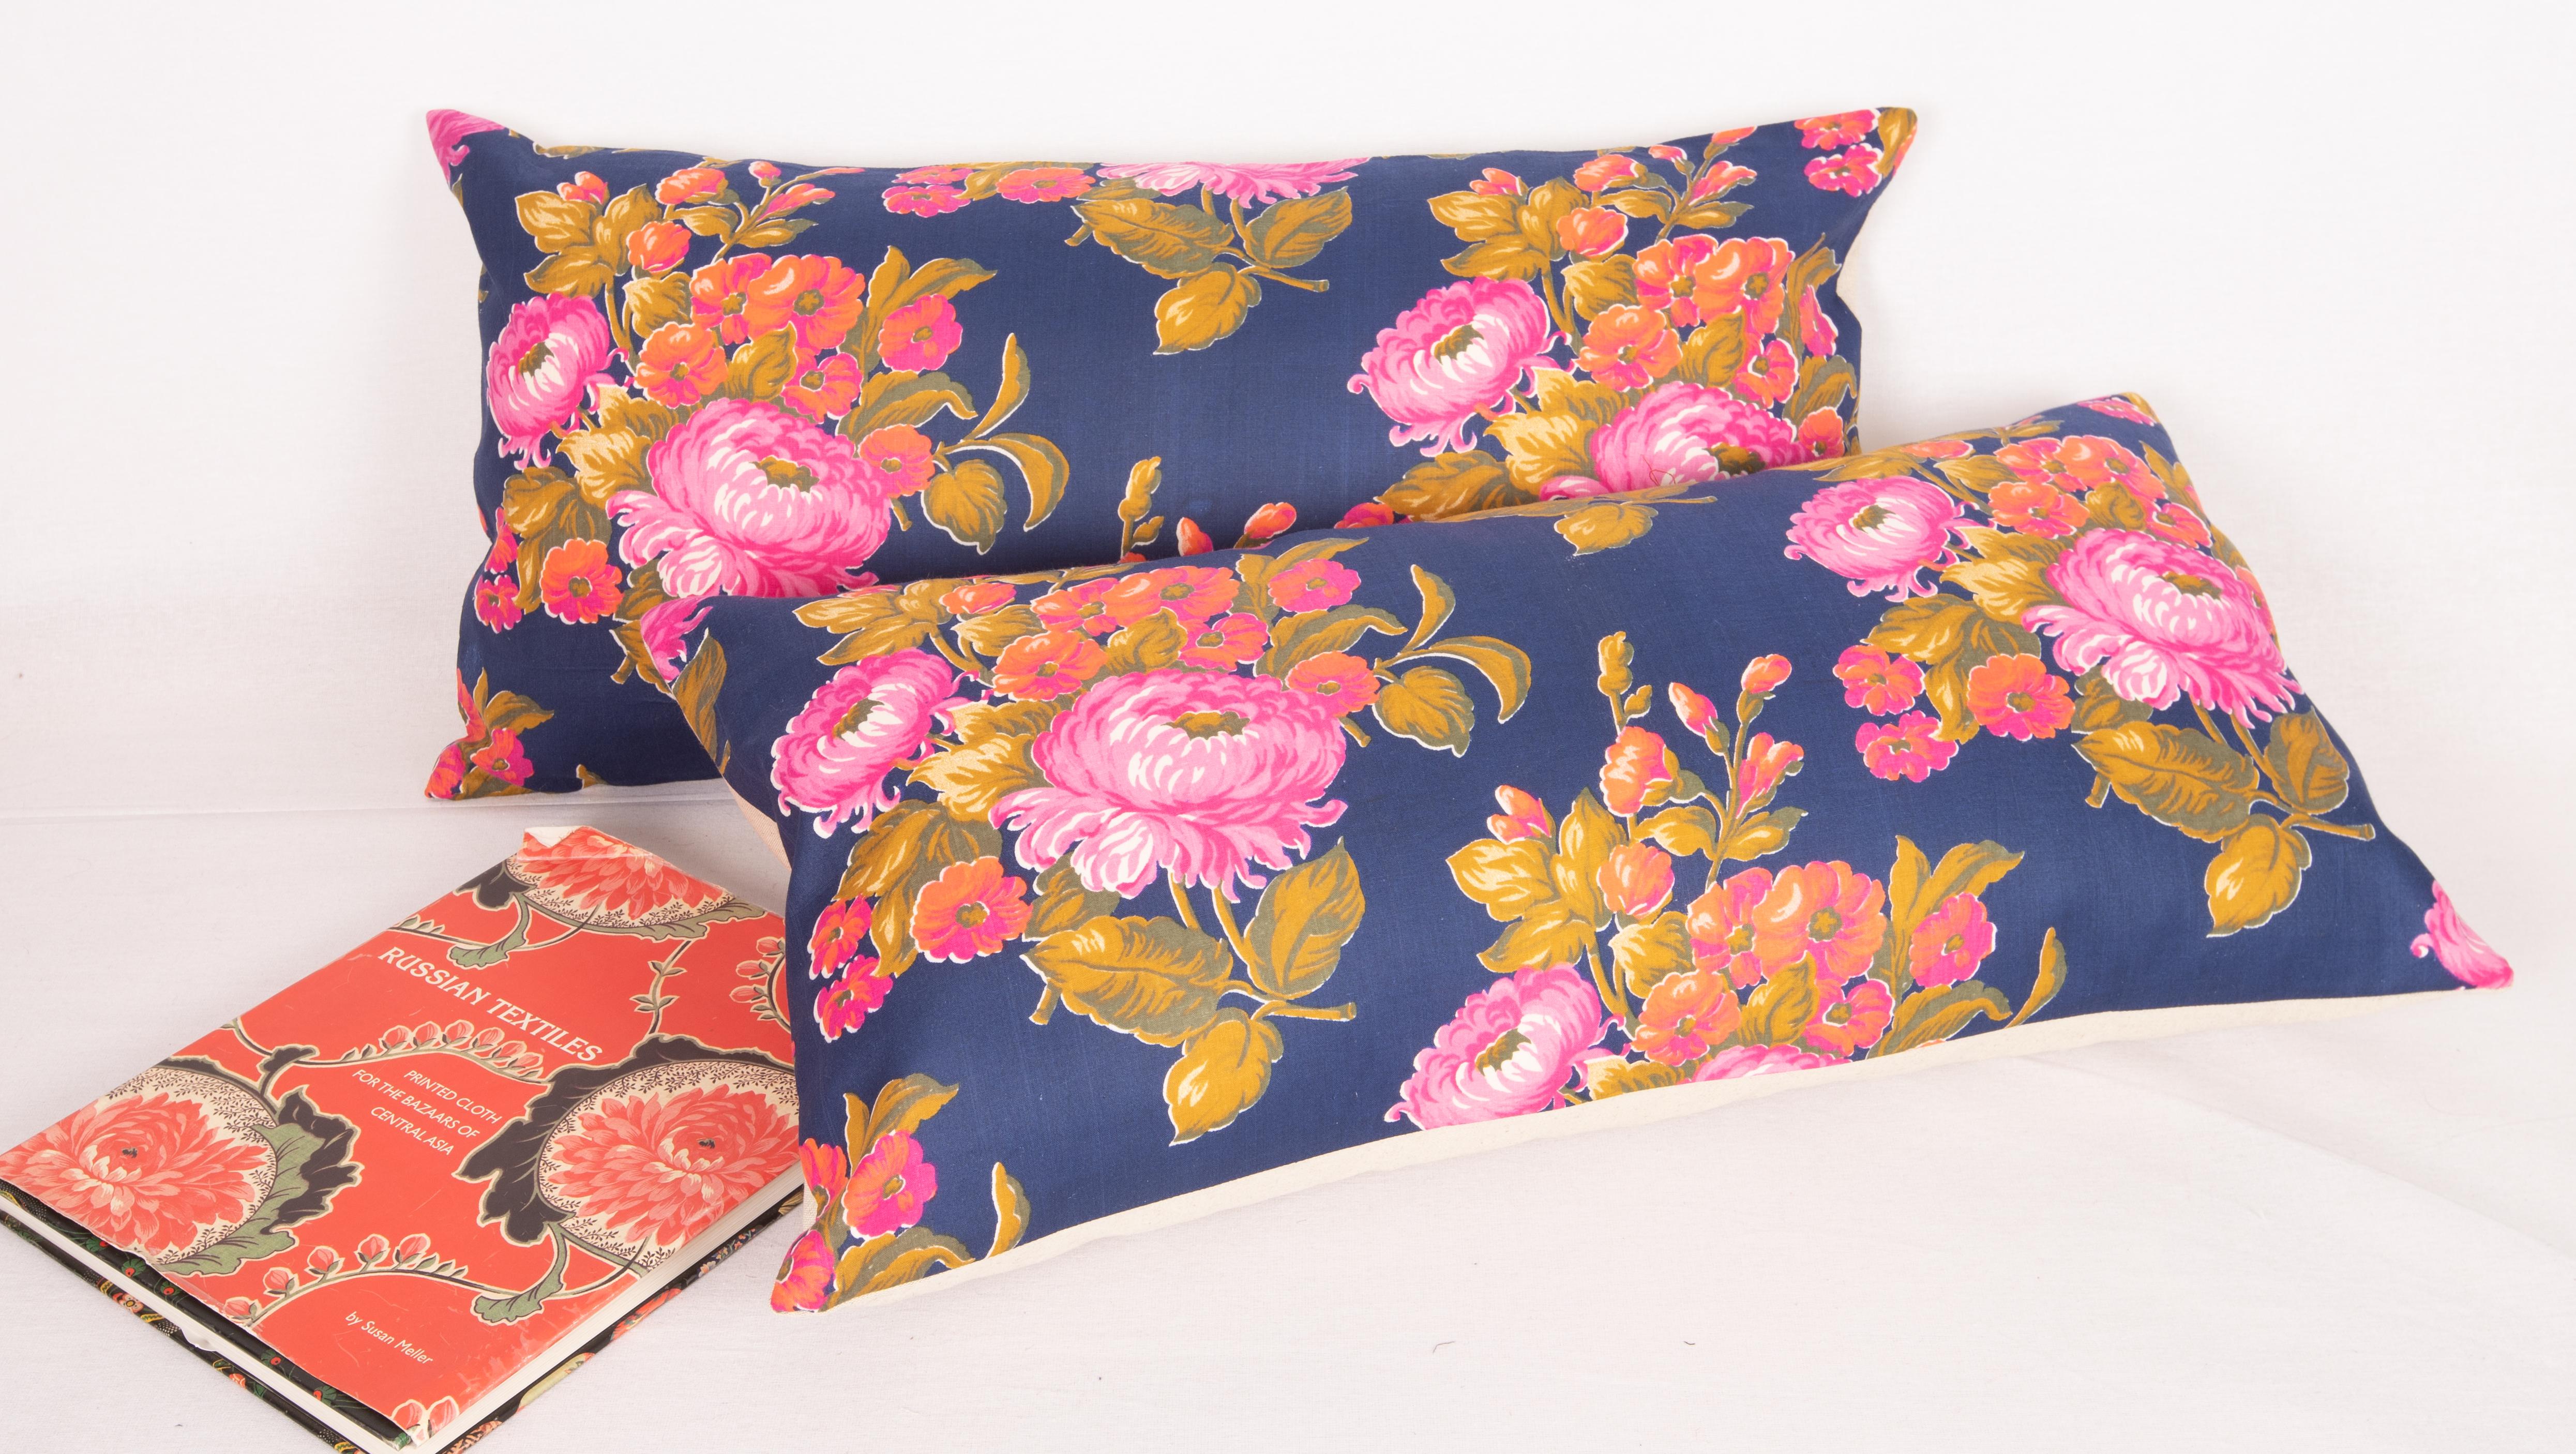 Mid-Century Modern Russian Roller Printed Pillow Covers, Mid 20th C. For Sale